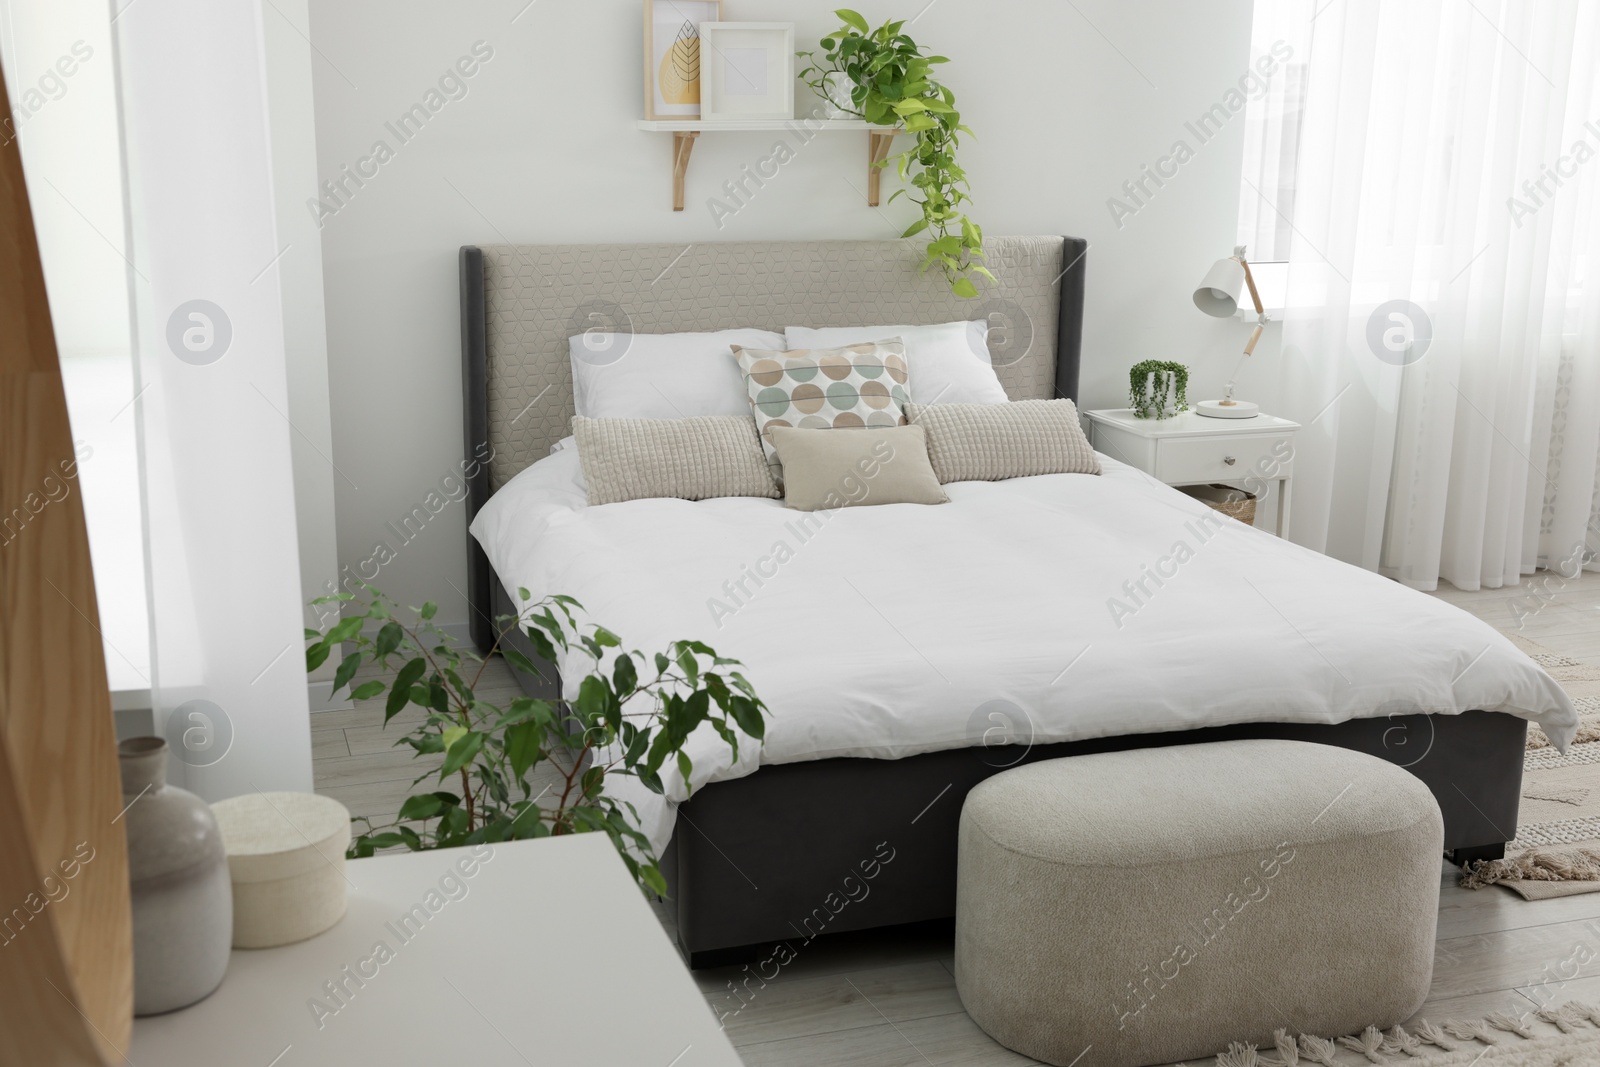 Photo of Stylish bedroom interior with large comfortable bed, ottoman and bedside table